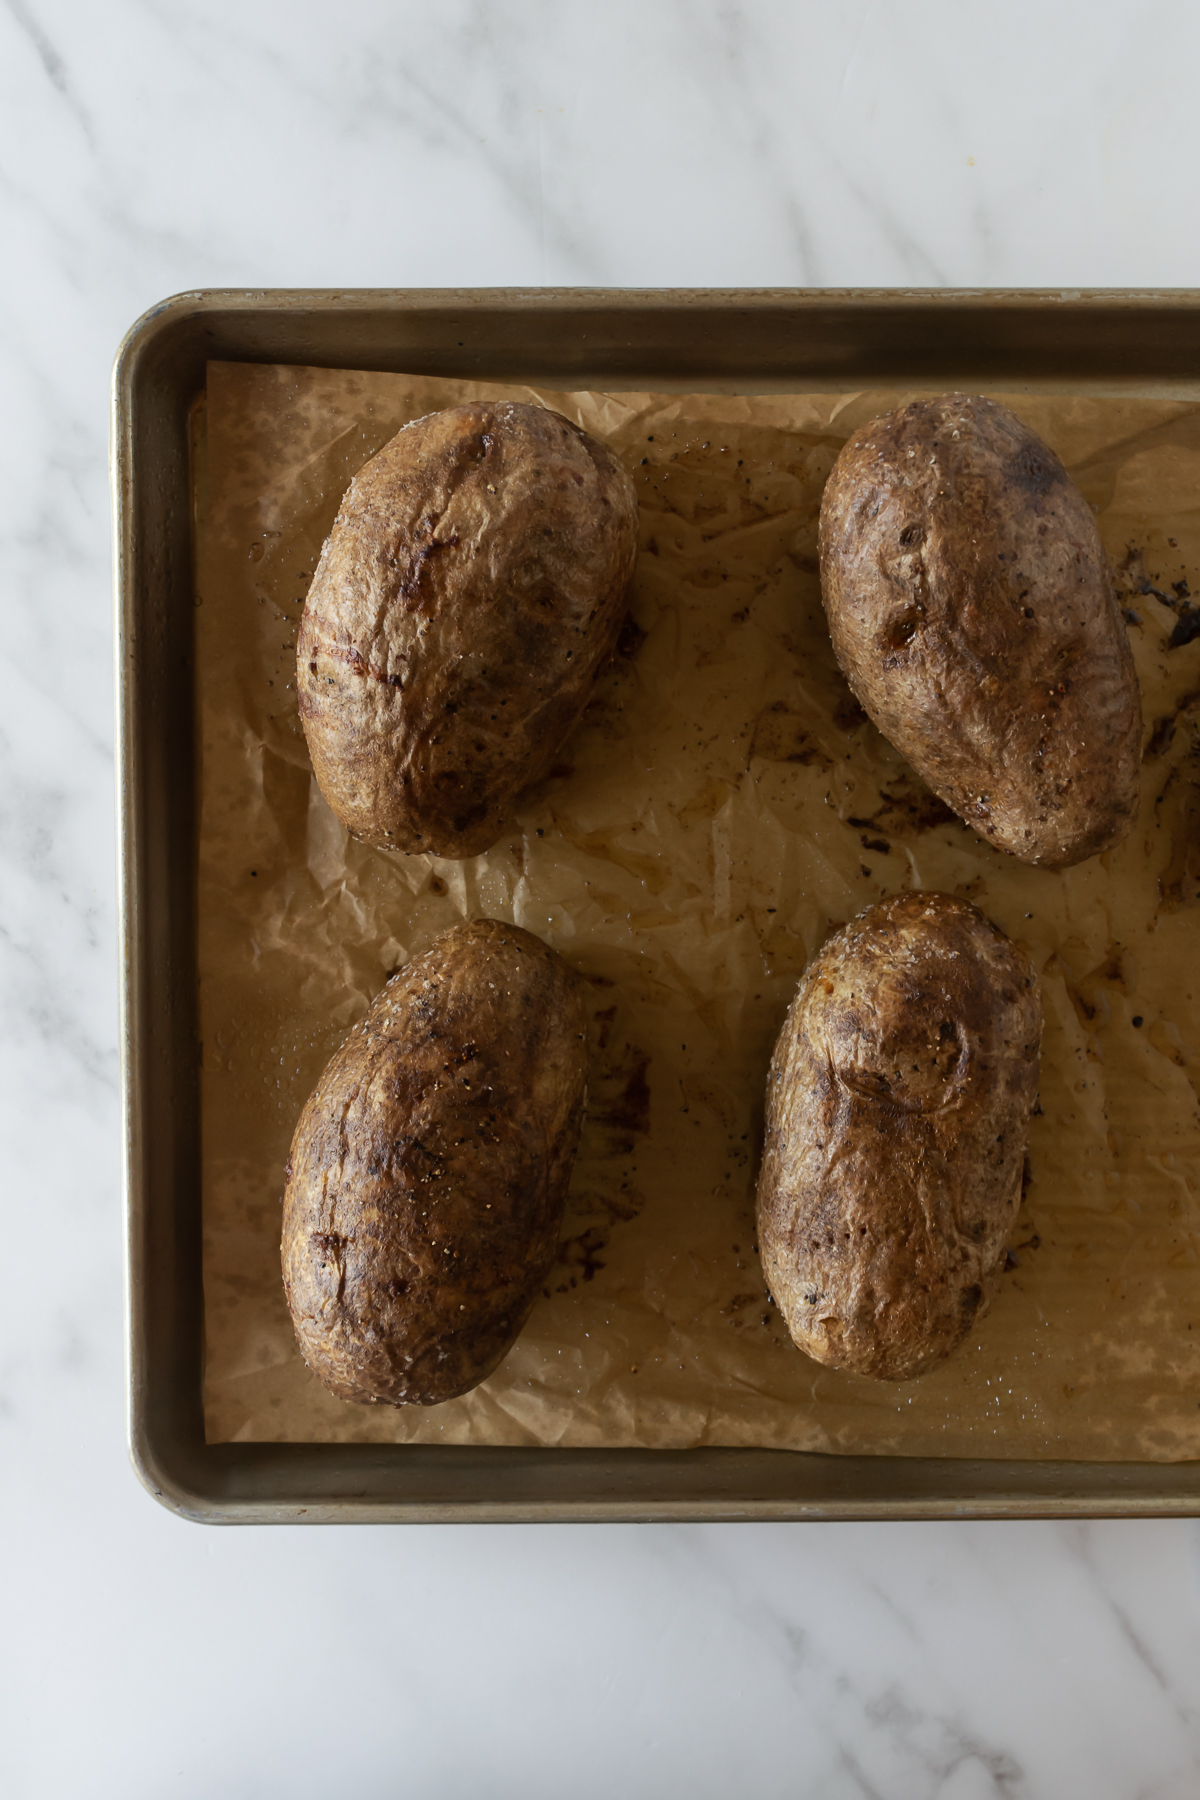 baked potatoes on a baking sheet lined with parchment paper.